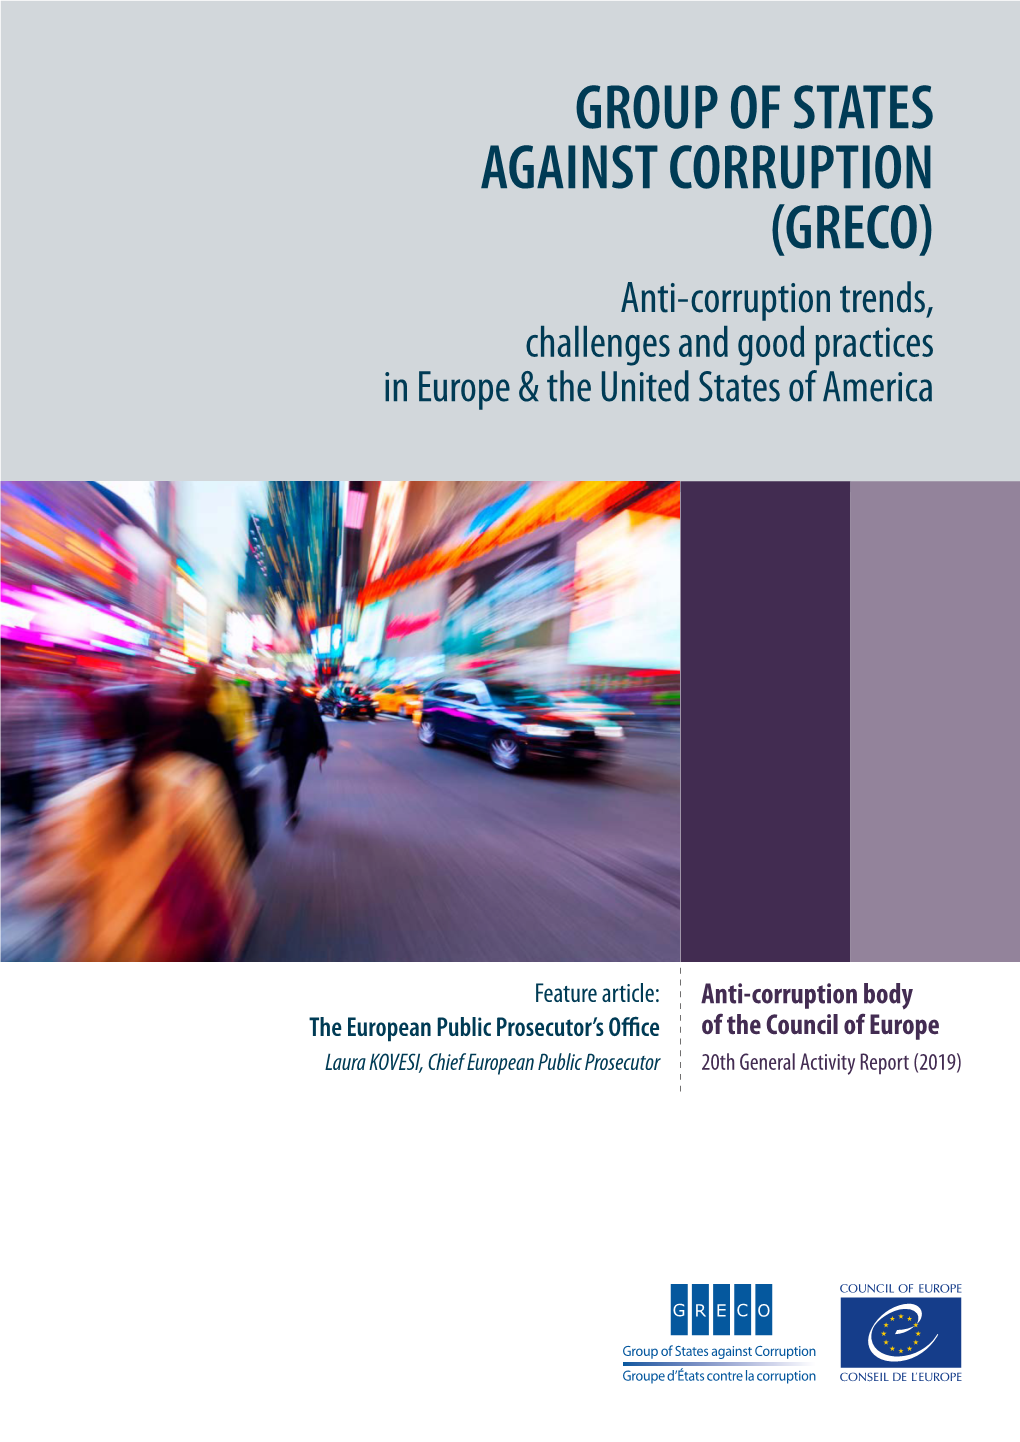 GROUP of STATES AGAINST CORRUPTION (GRECO) Anti-Corruption Trends, Challenges and Good Practices in Europe & the United States of America PREMS 050920